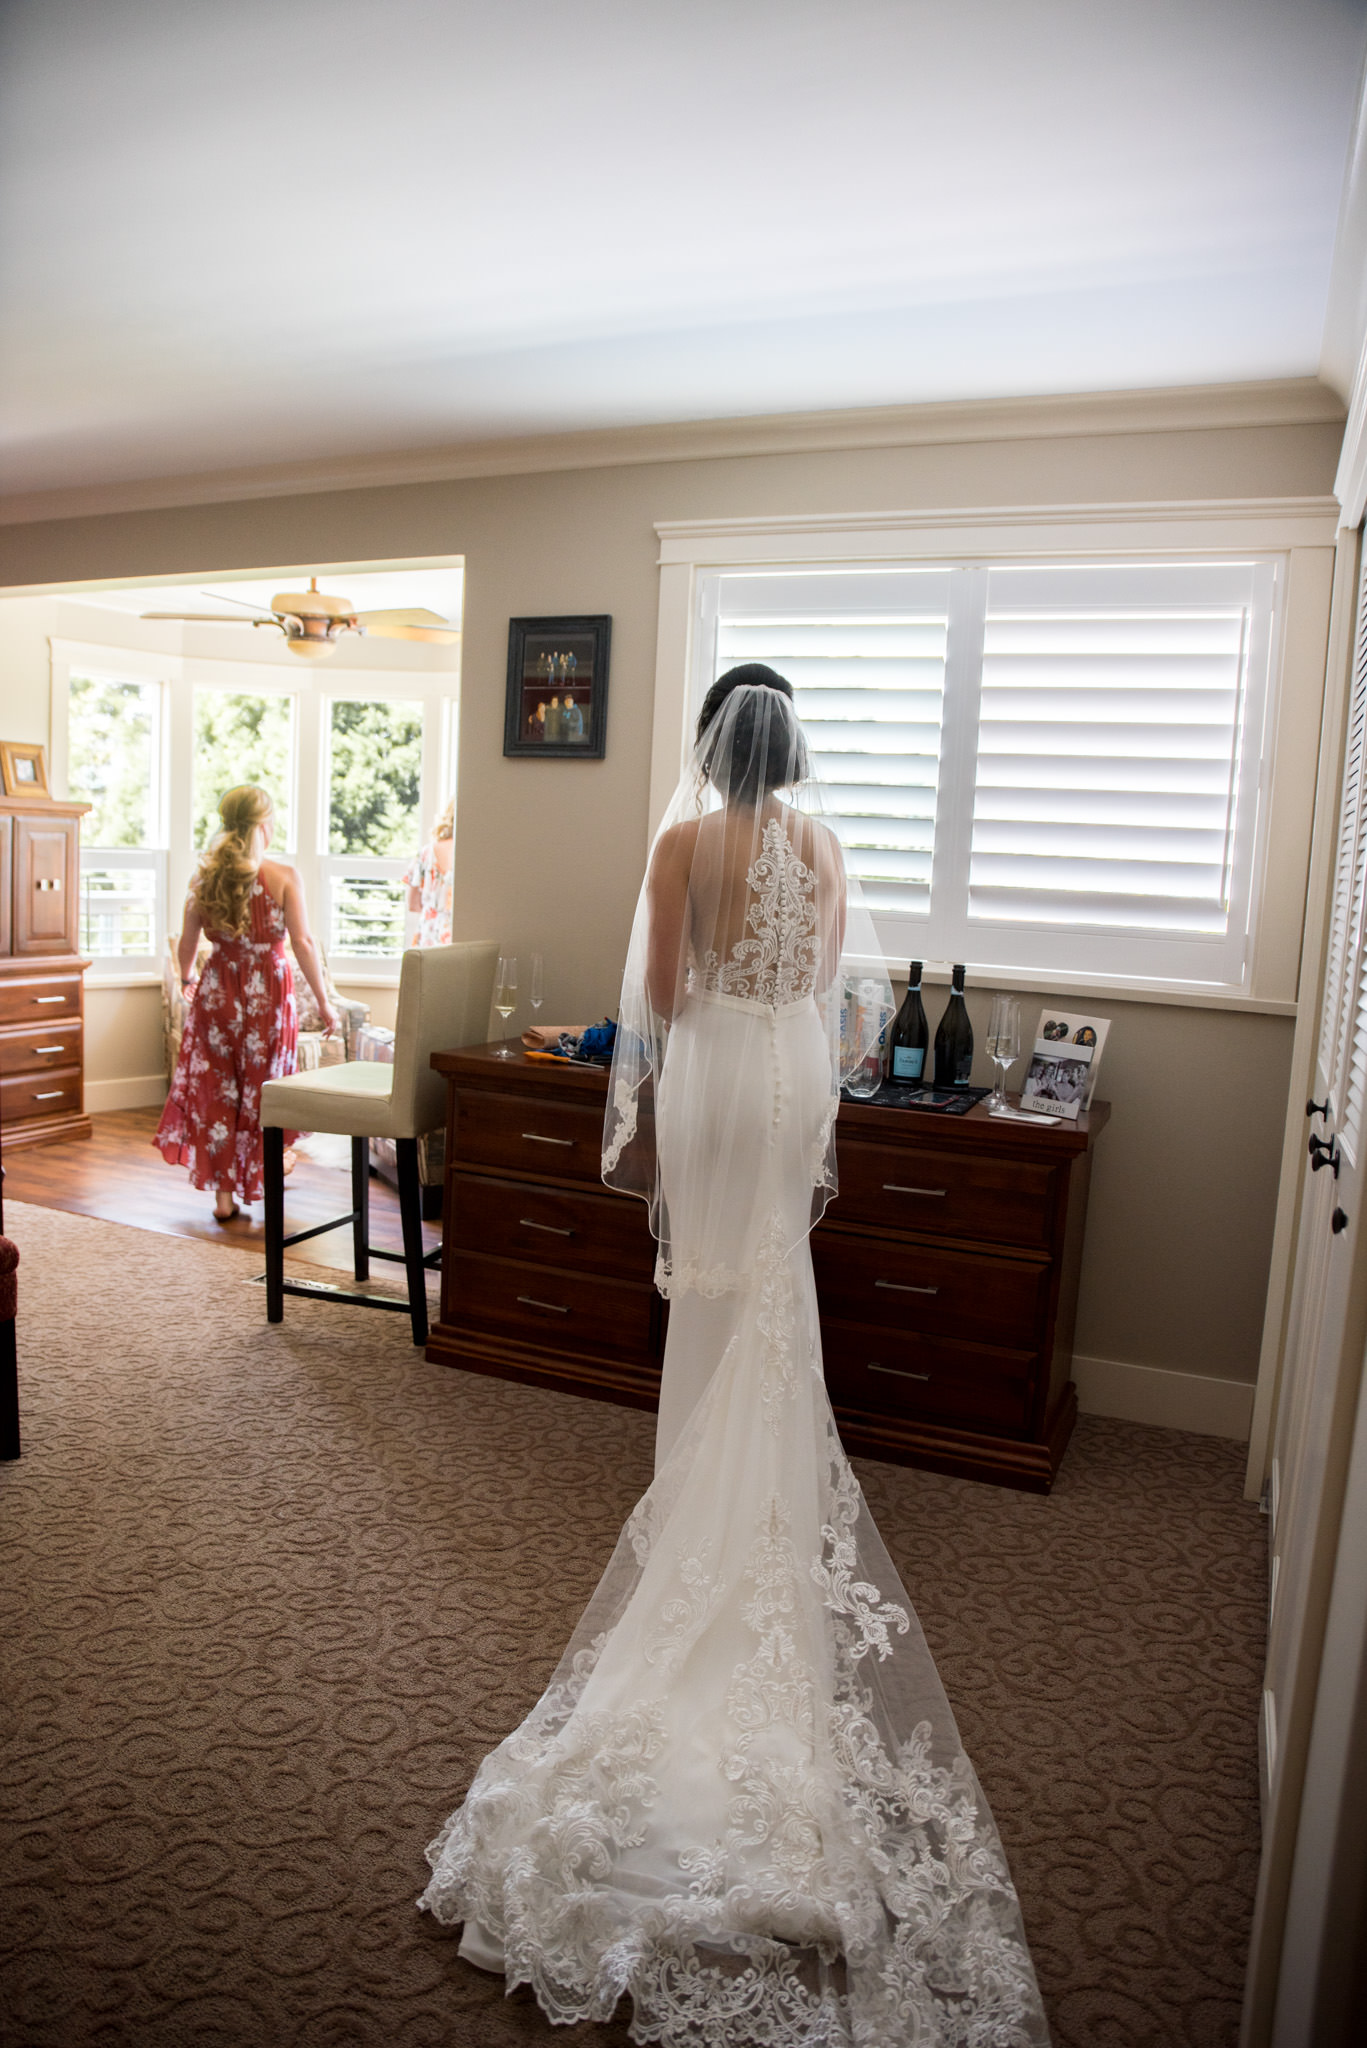 Bride getting ready in a house in BC, Canada